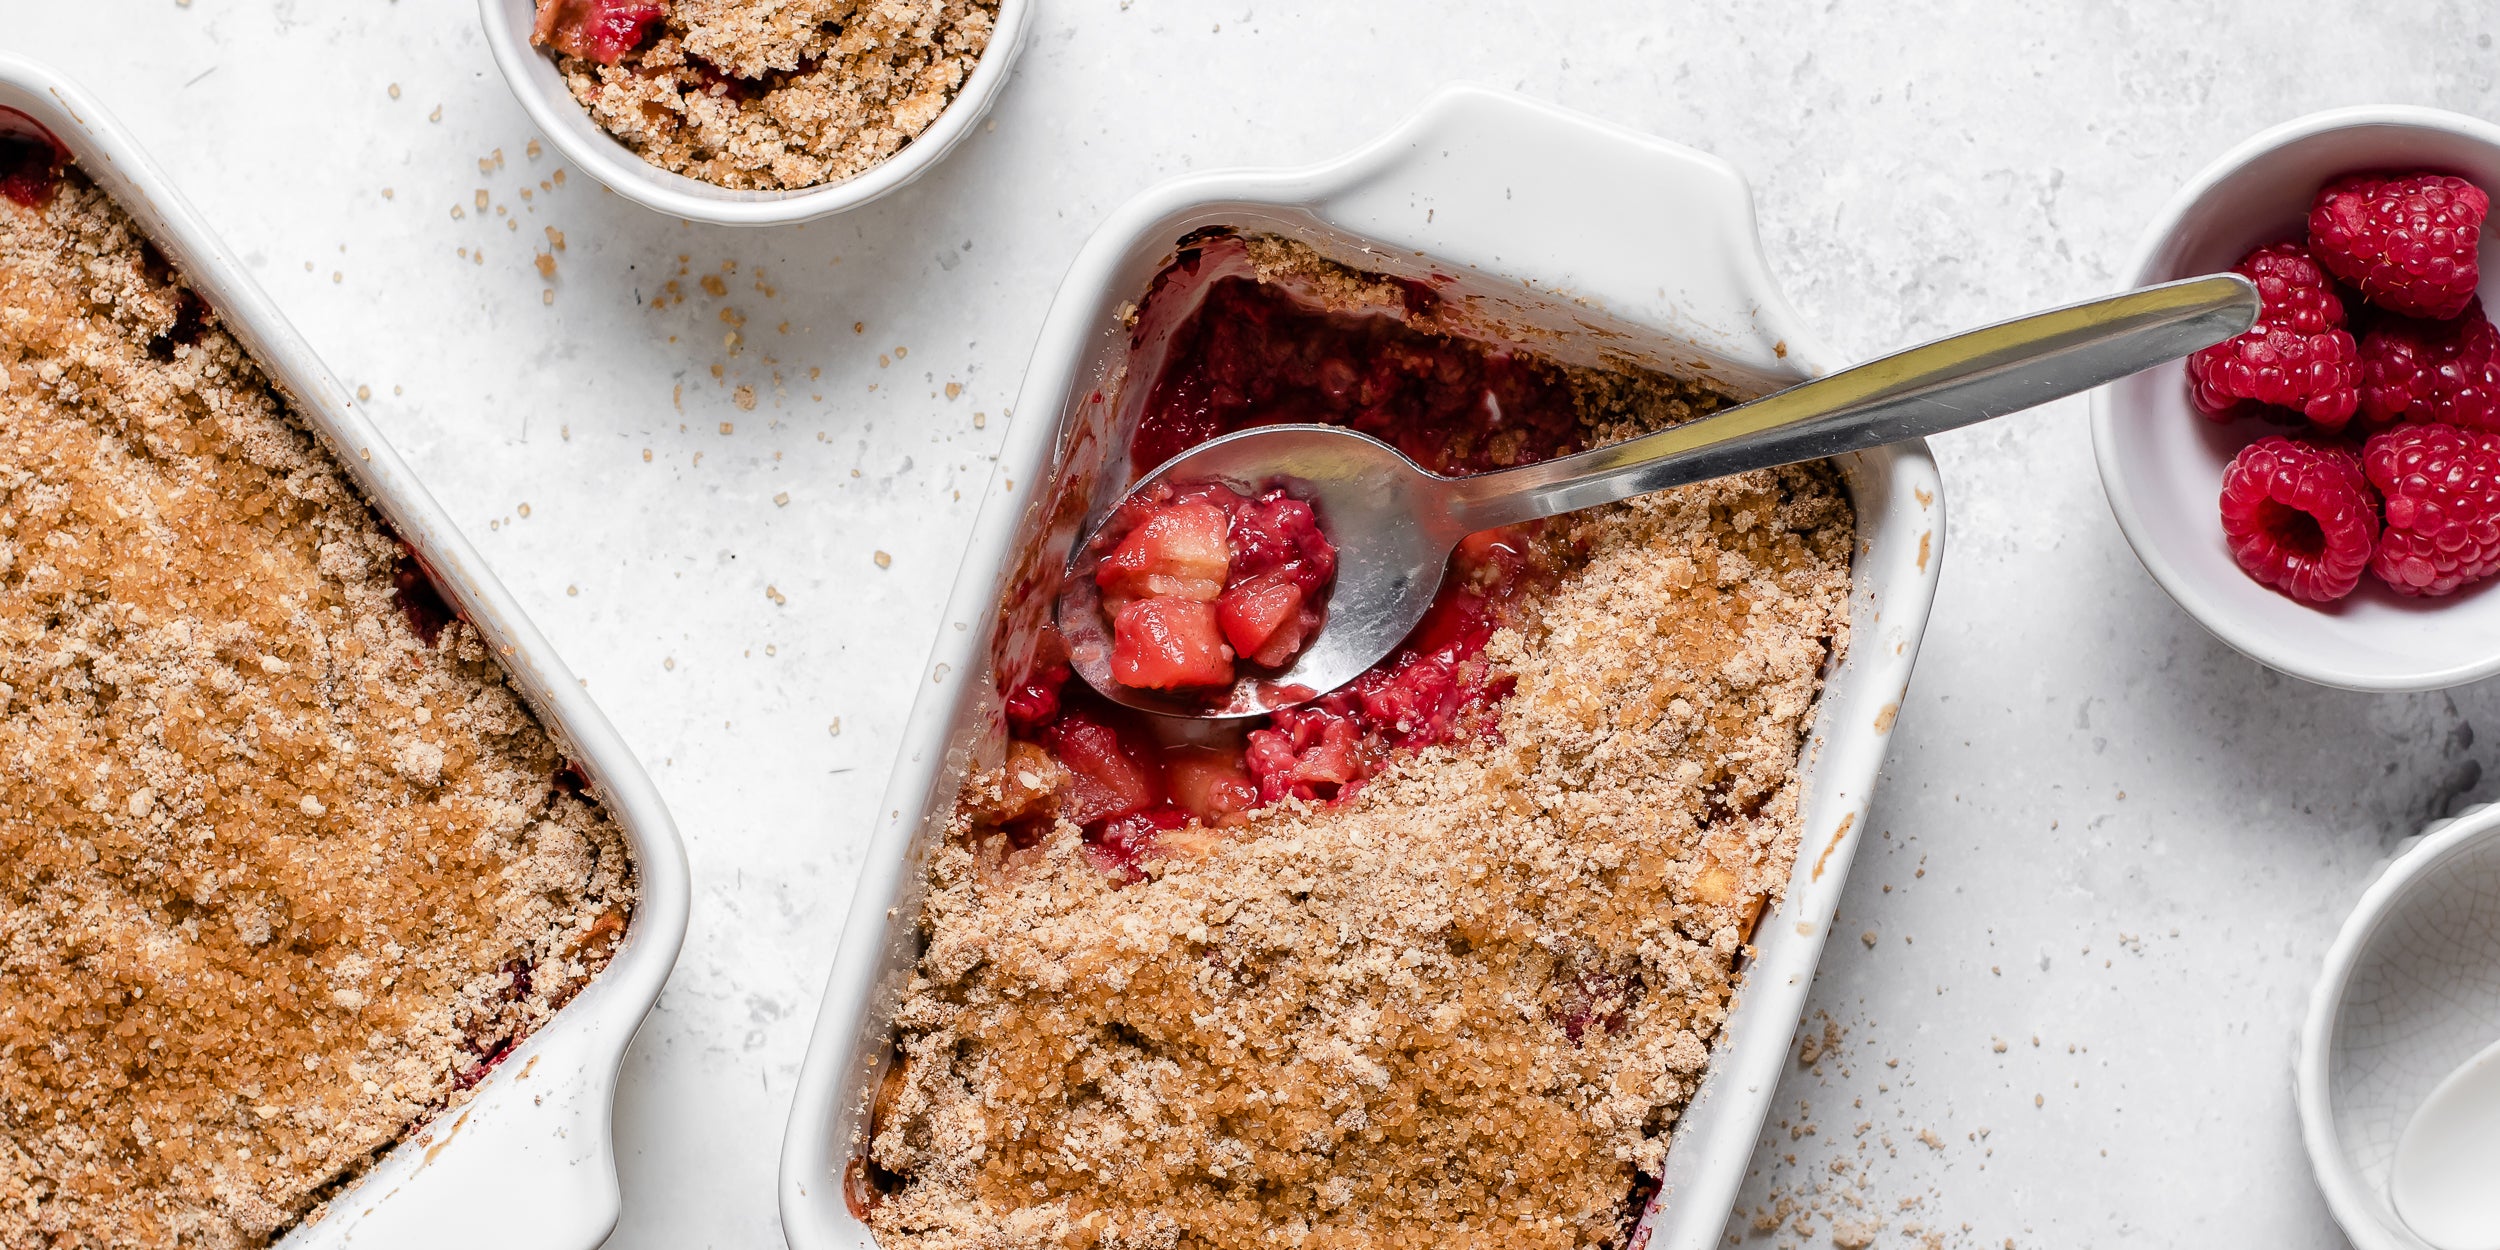 Apple & Raspberry Crumble with a spoon serving up a portion showing the warm, sweet filling